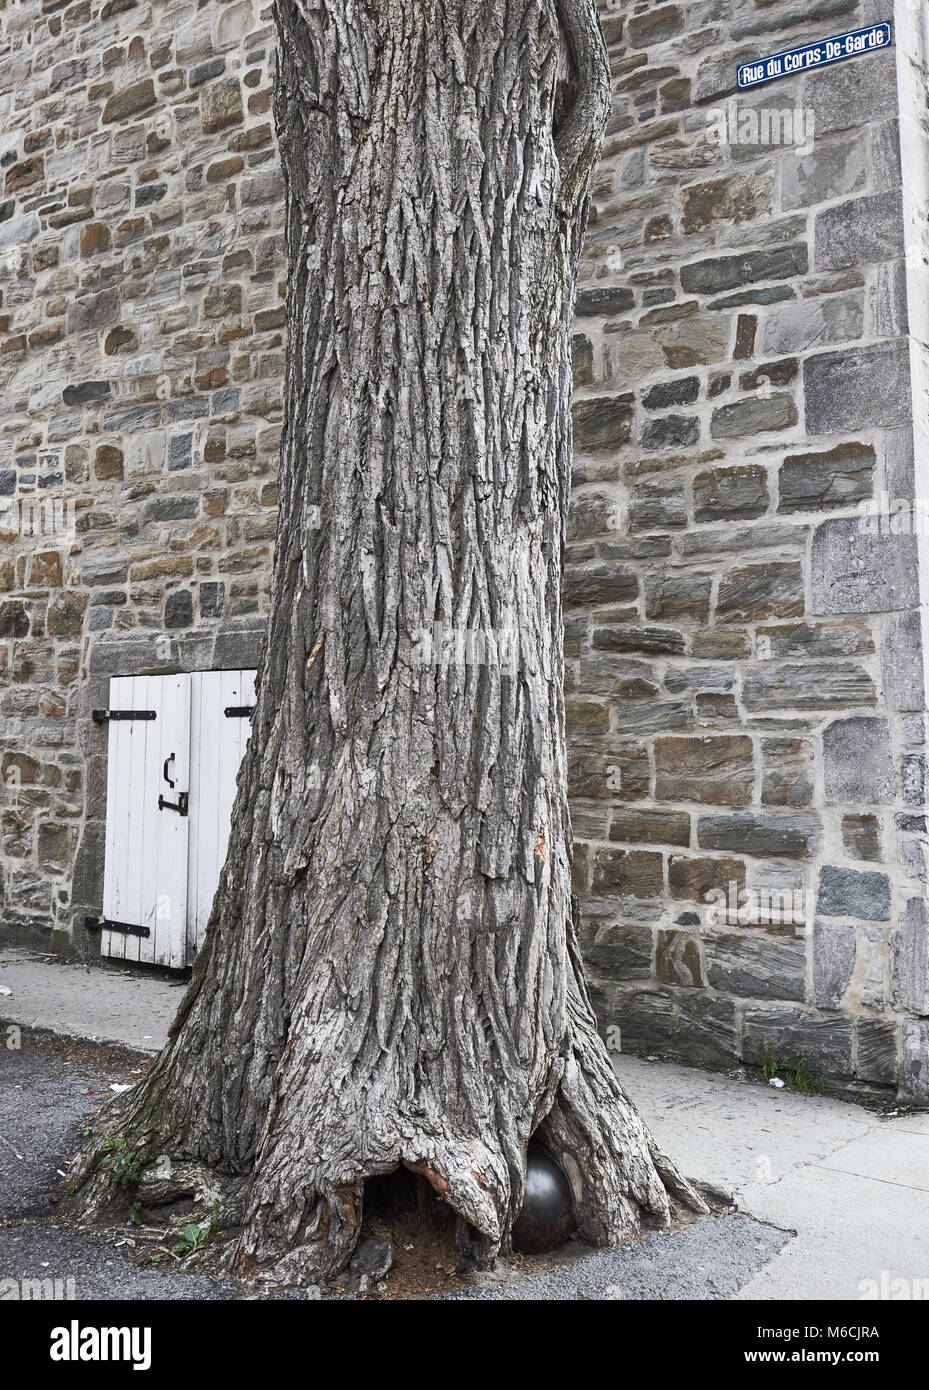 Cannonball embedded in tree, Rue du Corps-de-Garde, Quebec City, Quebec,  Canada Stock Photo - Alamy